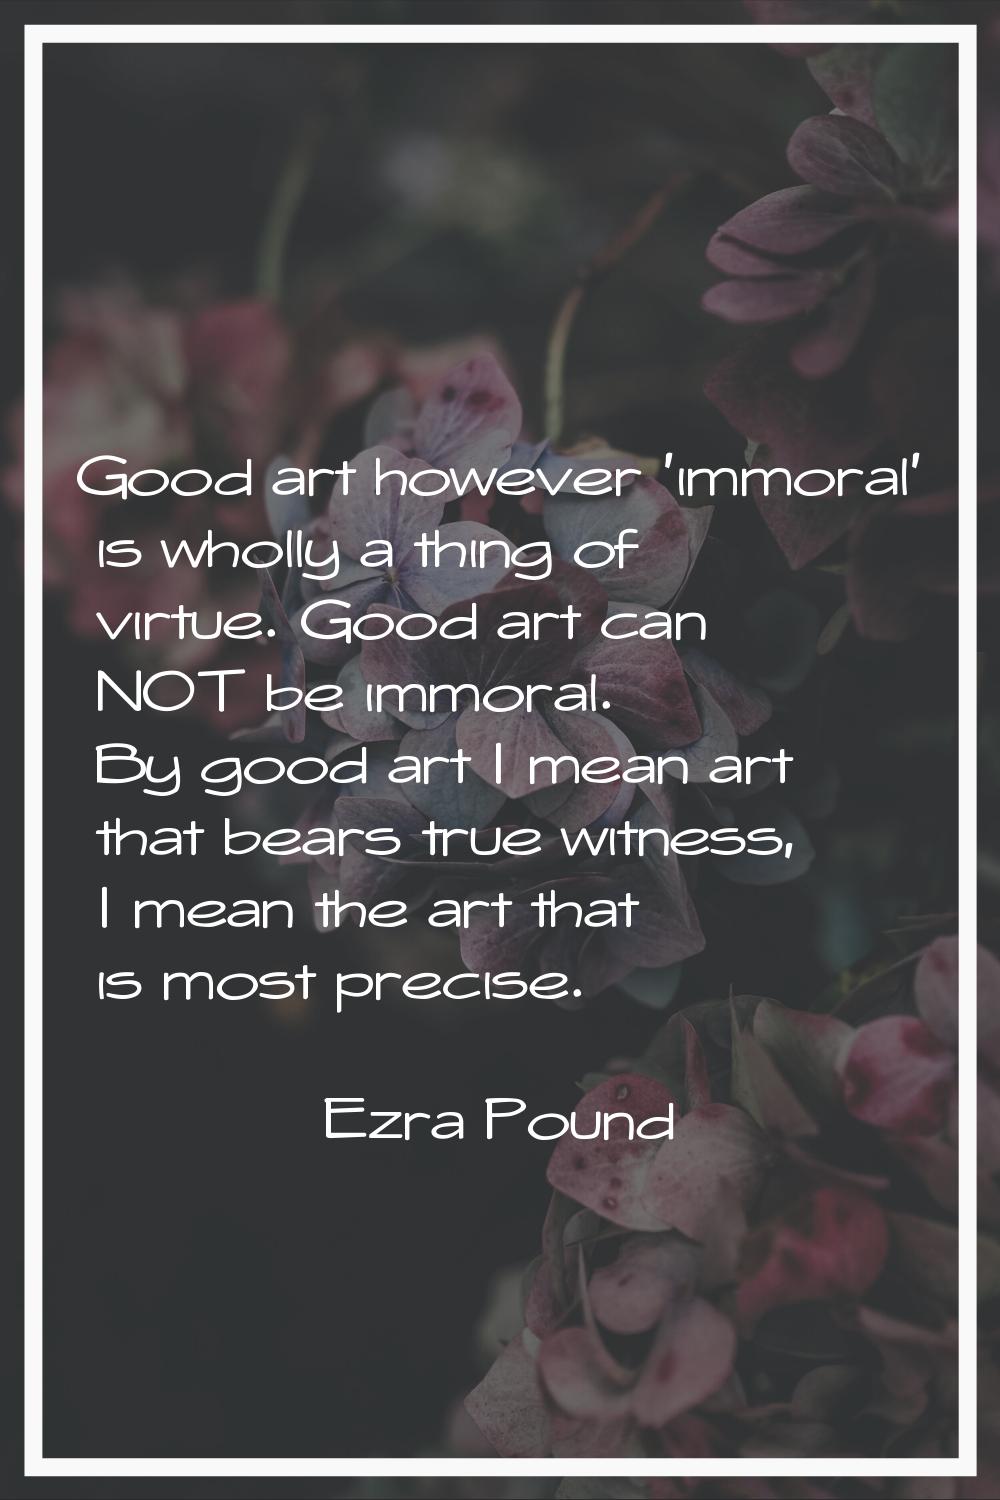 Good art however 'immoral' is wholly a thing of virtue. Good art can NOT be immoral. By good art I 